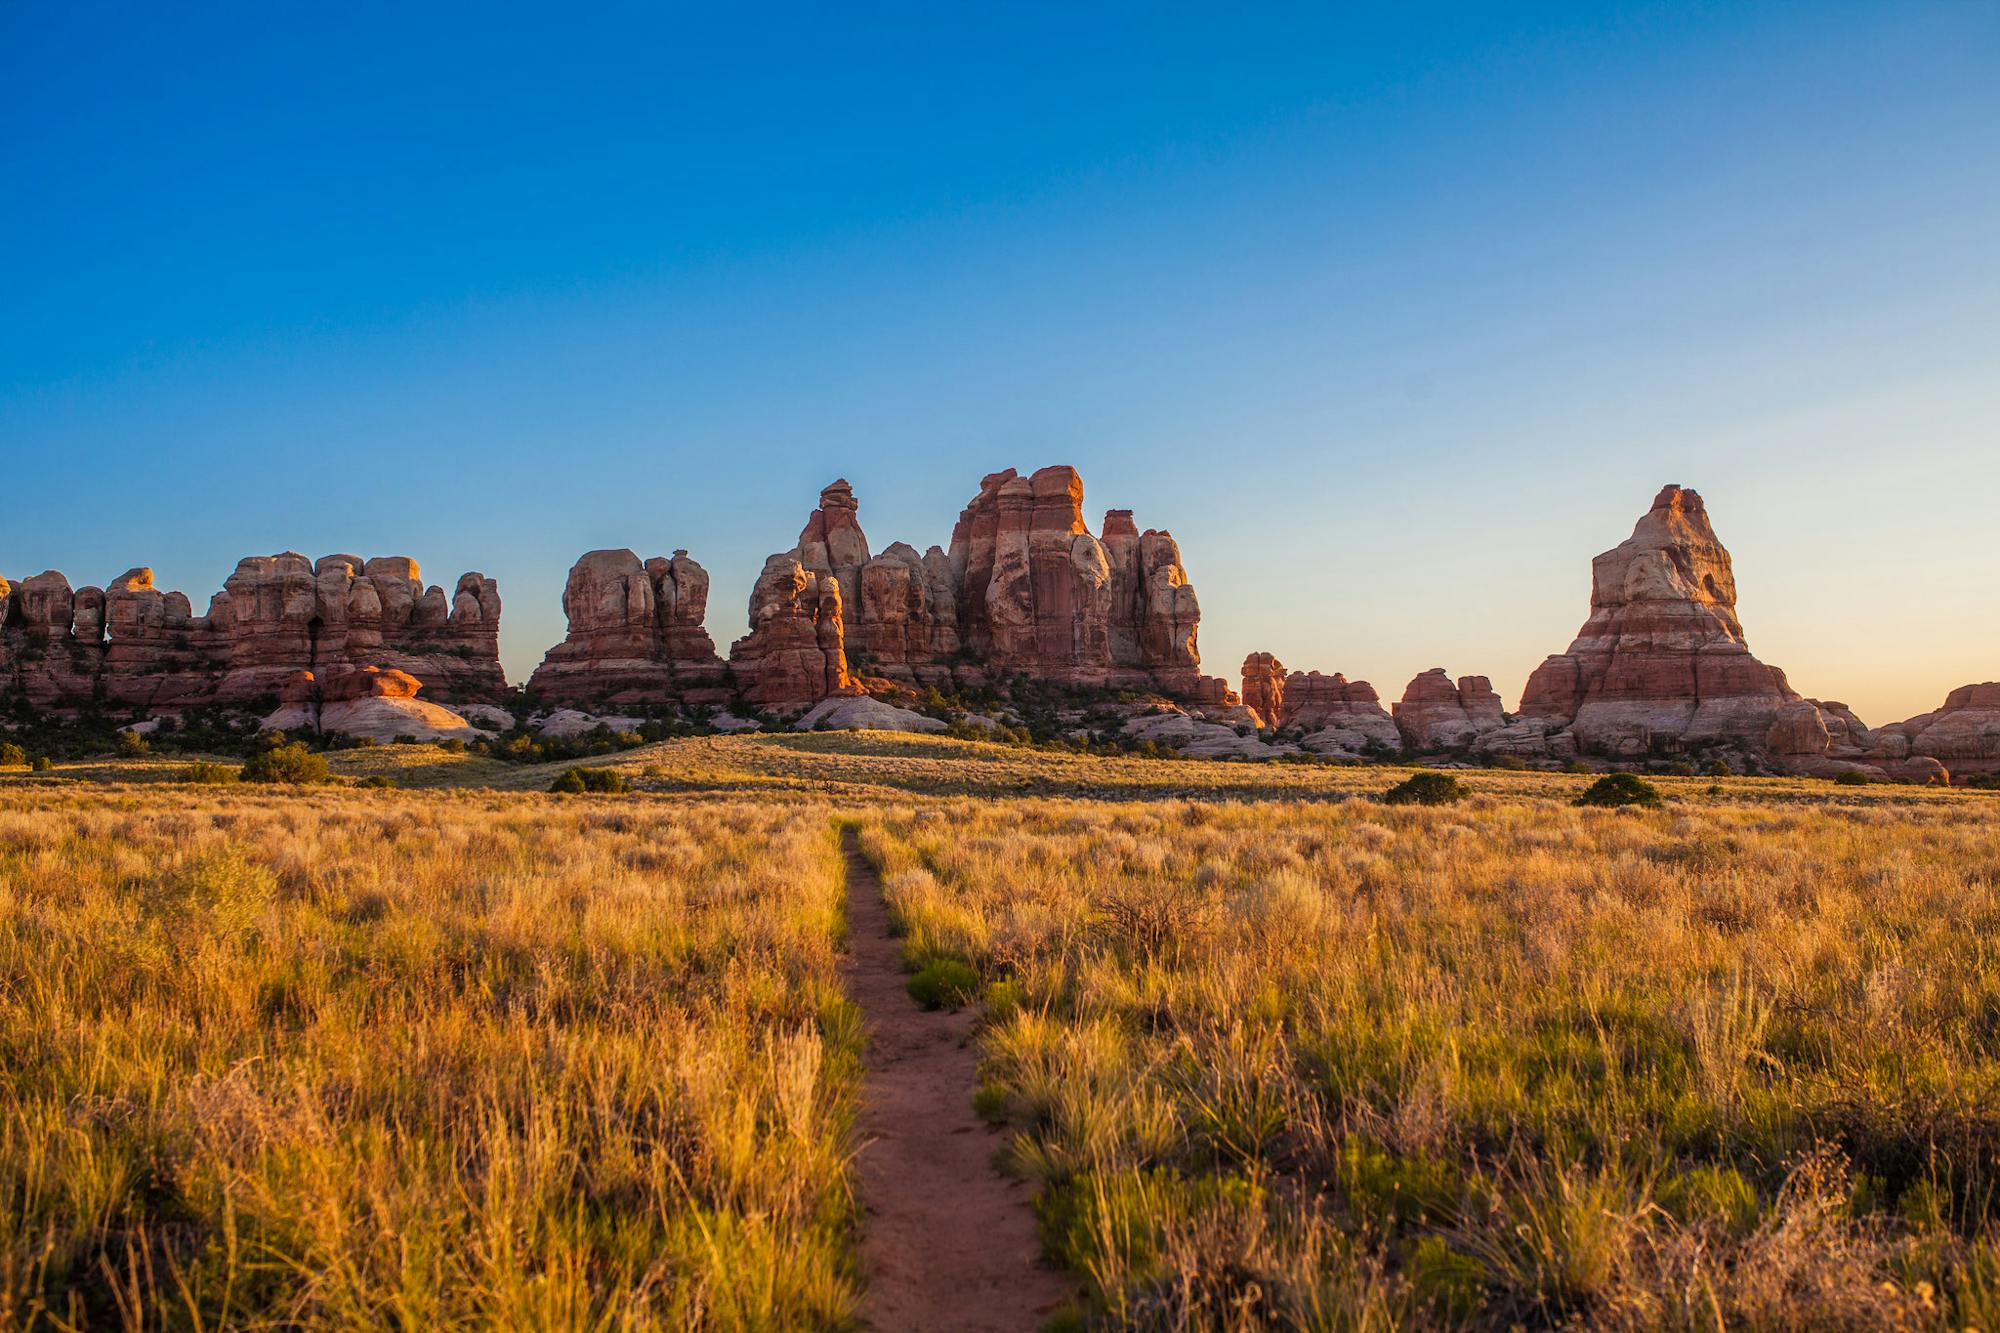 Chesler Park in the Needles District